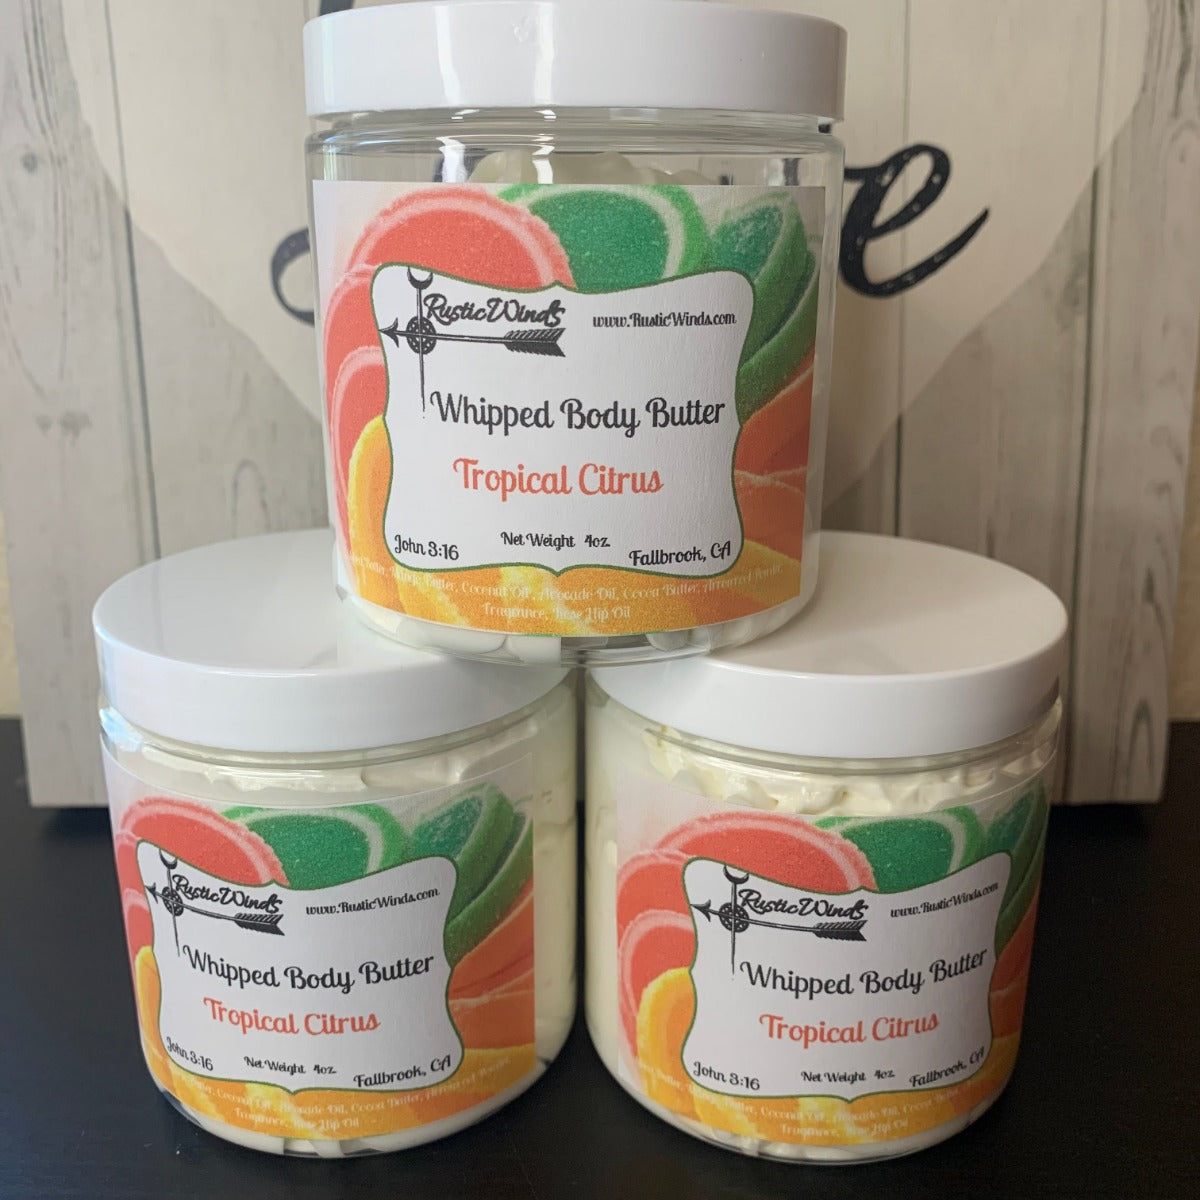 Whipped Body Butter - Tropical Citrus 4 oz